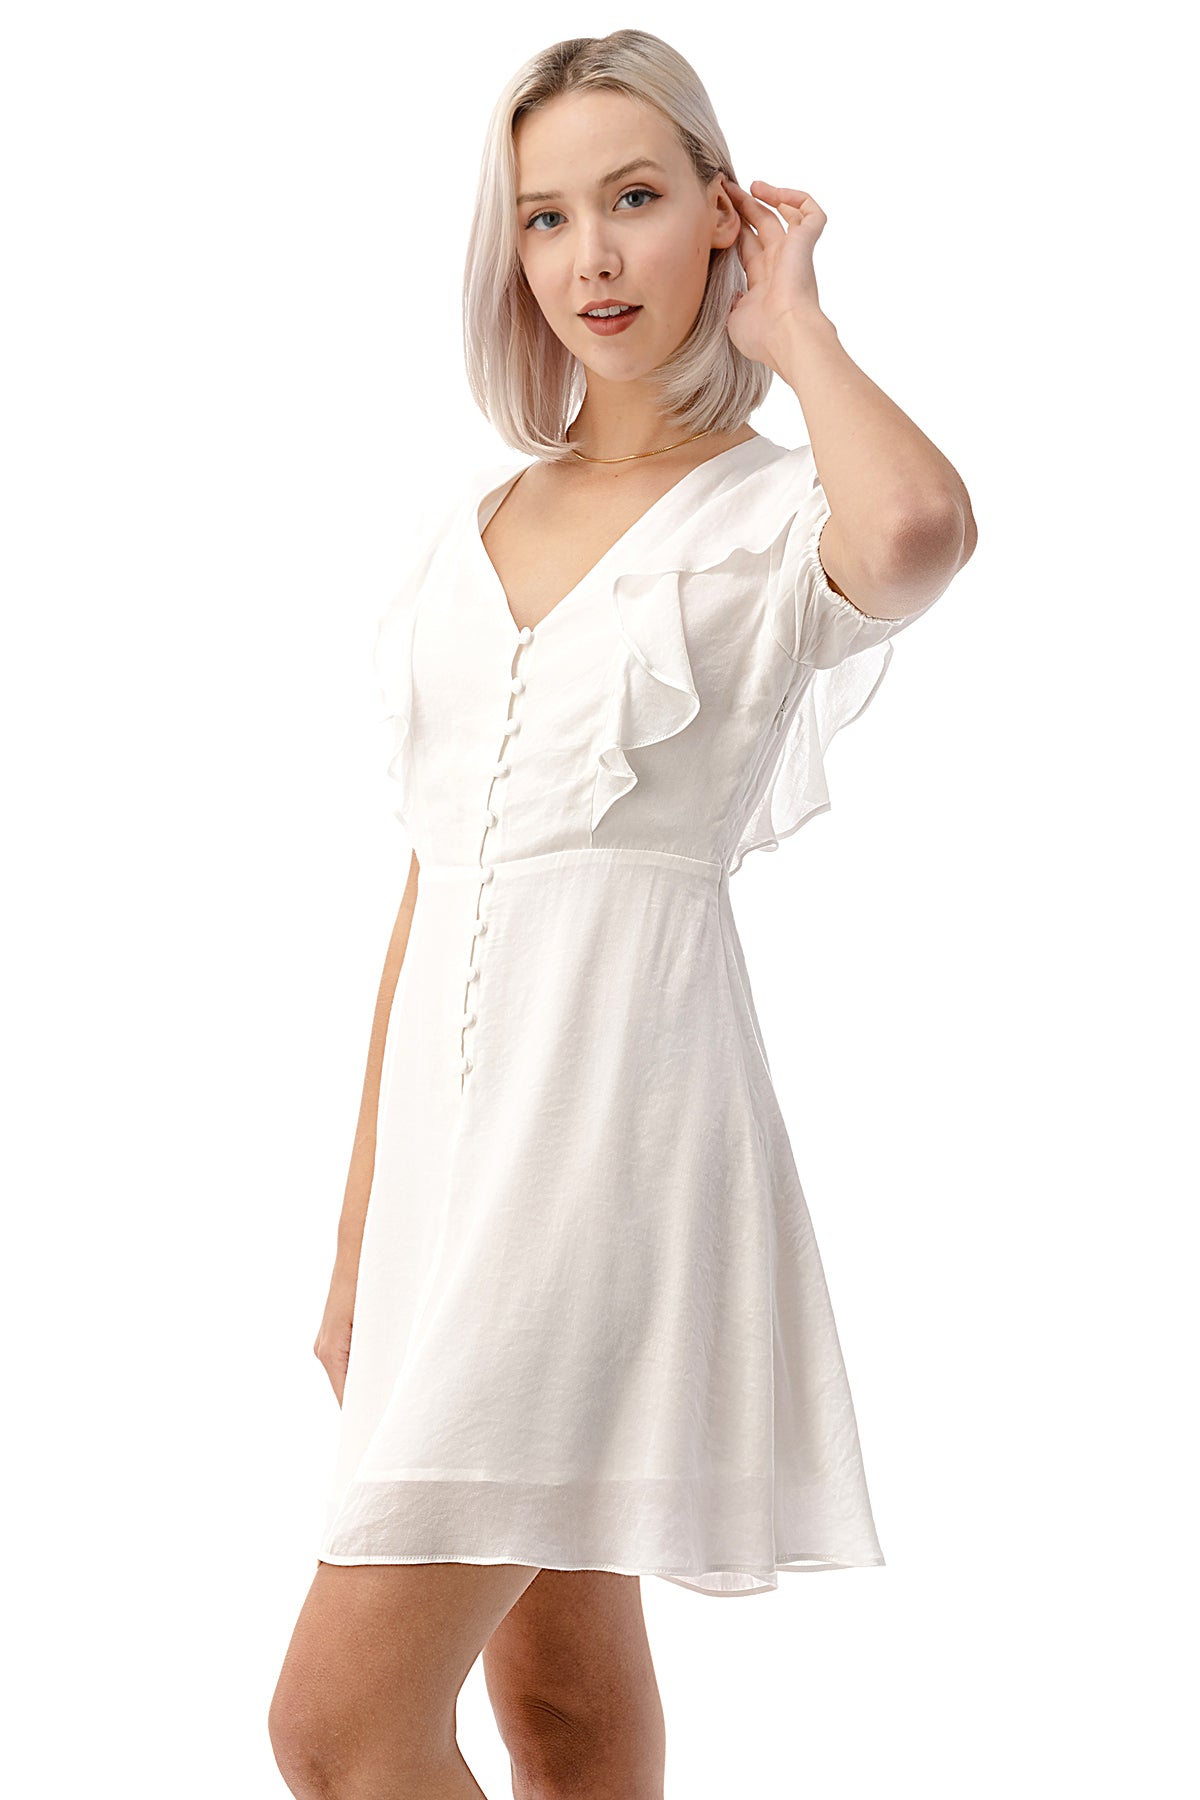 Button Down Dress Sleeve Short Above-Knee Ruffled A-Line Party EDGY Land – V-Neck